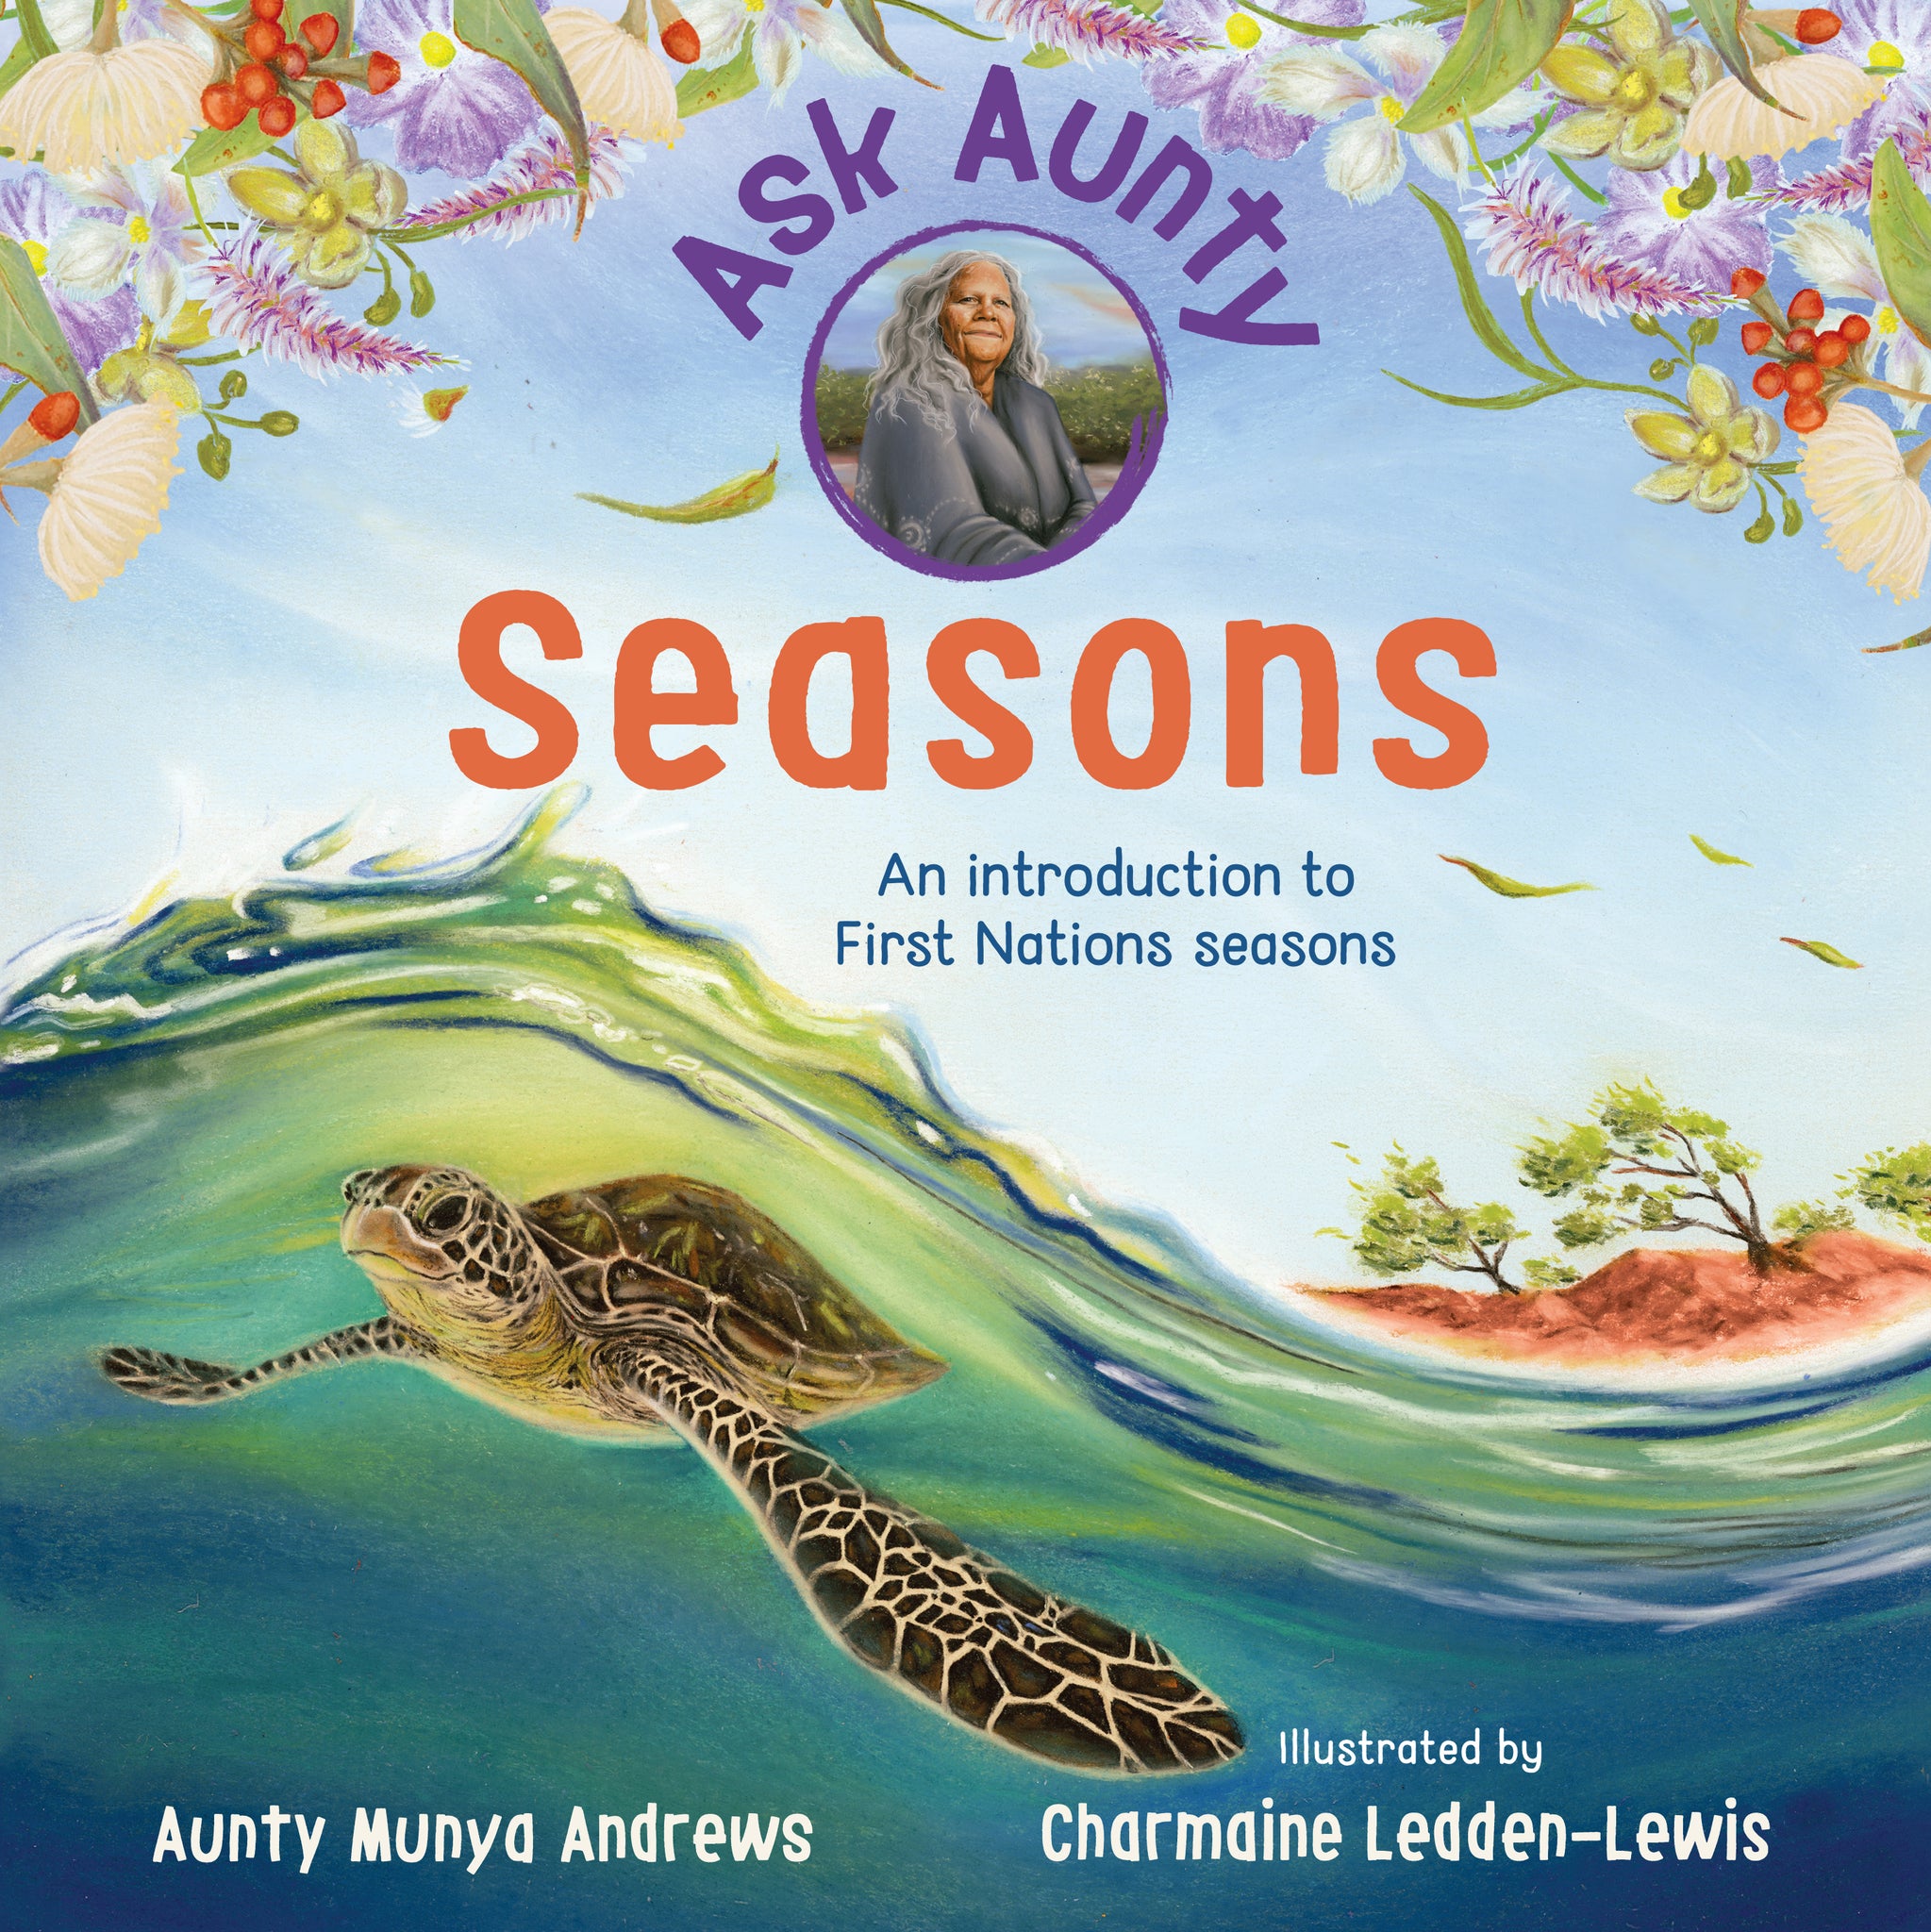 Ask Aunty: Seasons - An Introduction to First Nations Seasons